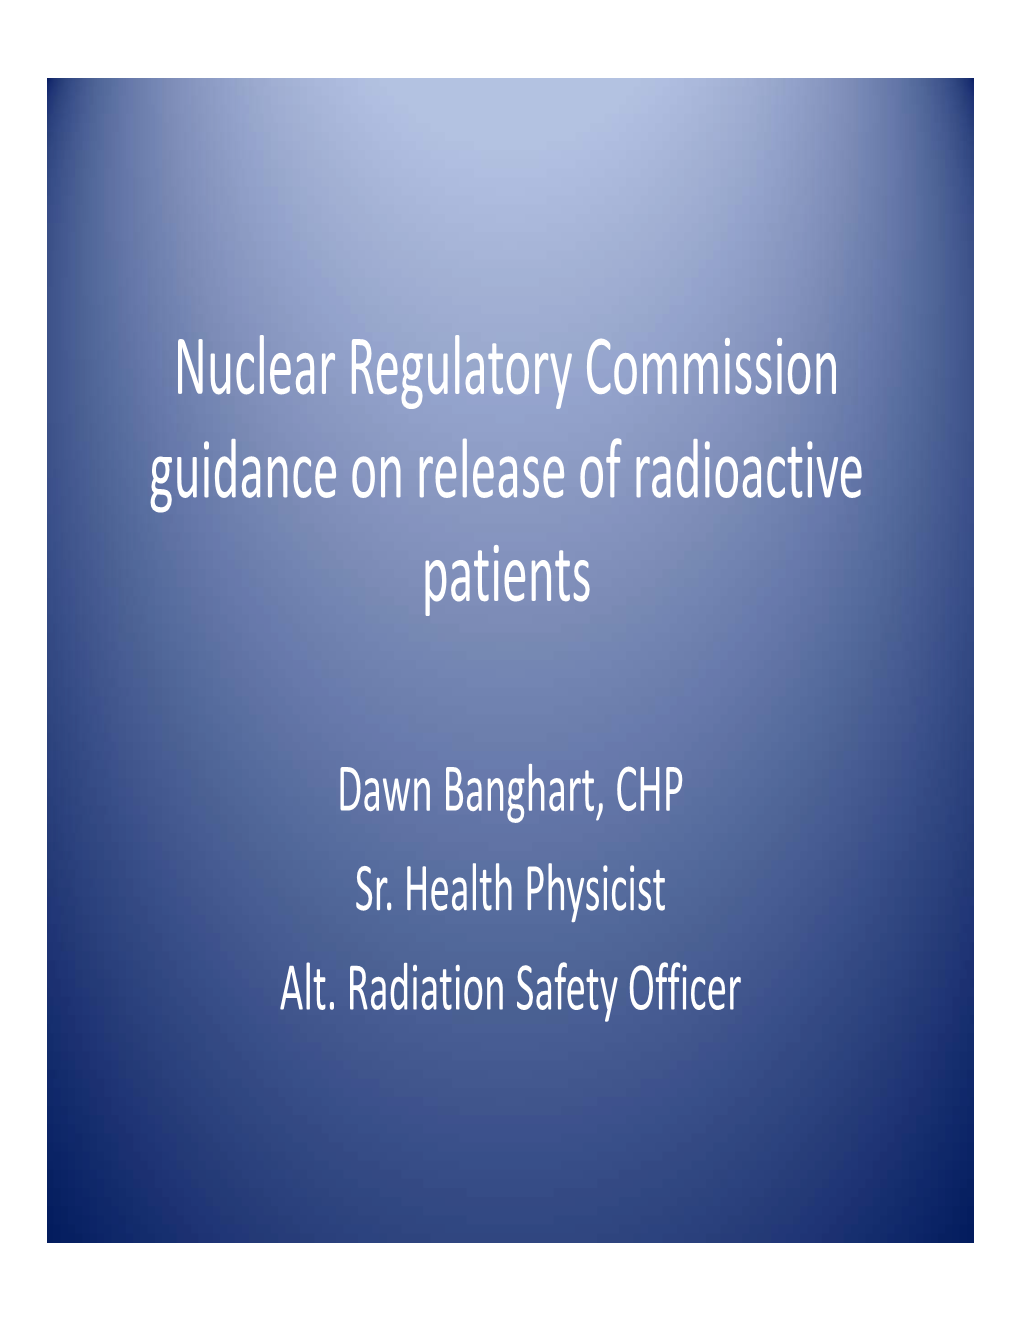 Nuclear Regulatory Commission Guidance on Release of Radioactive Patients